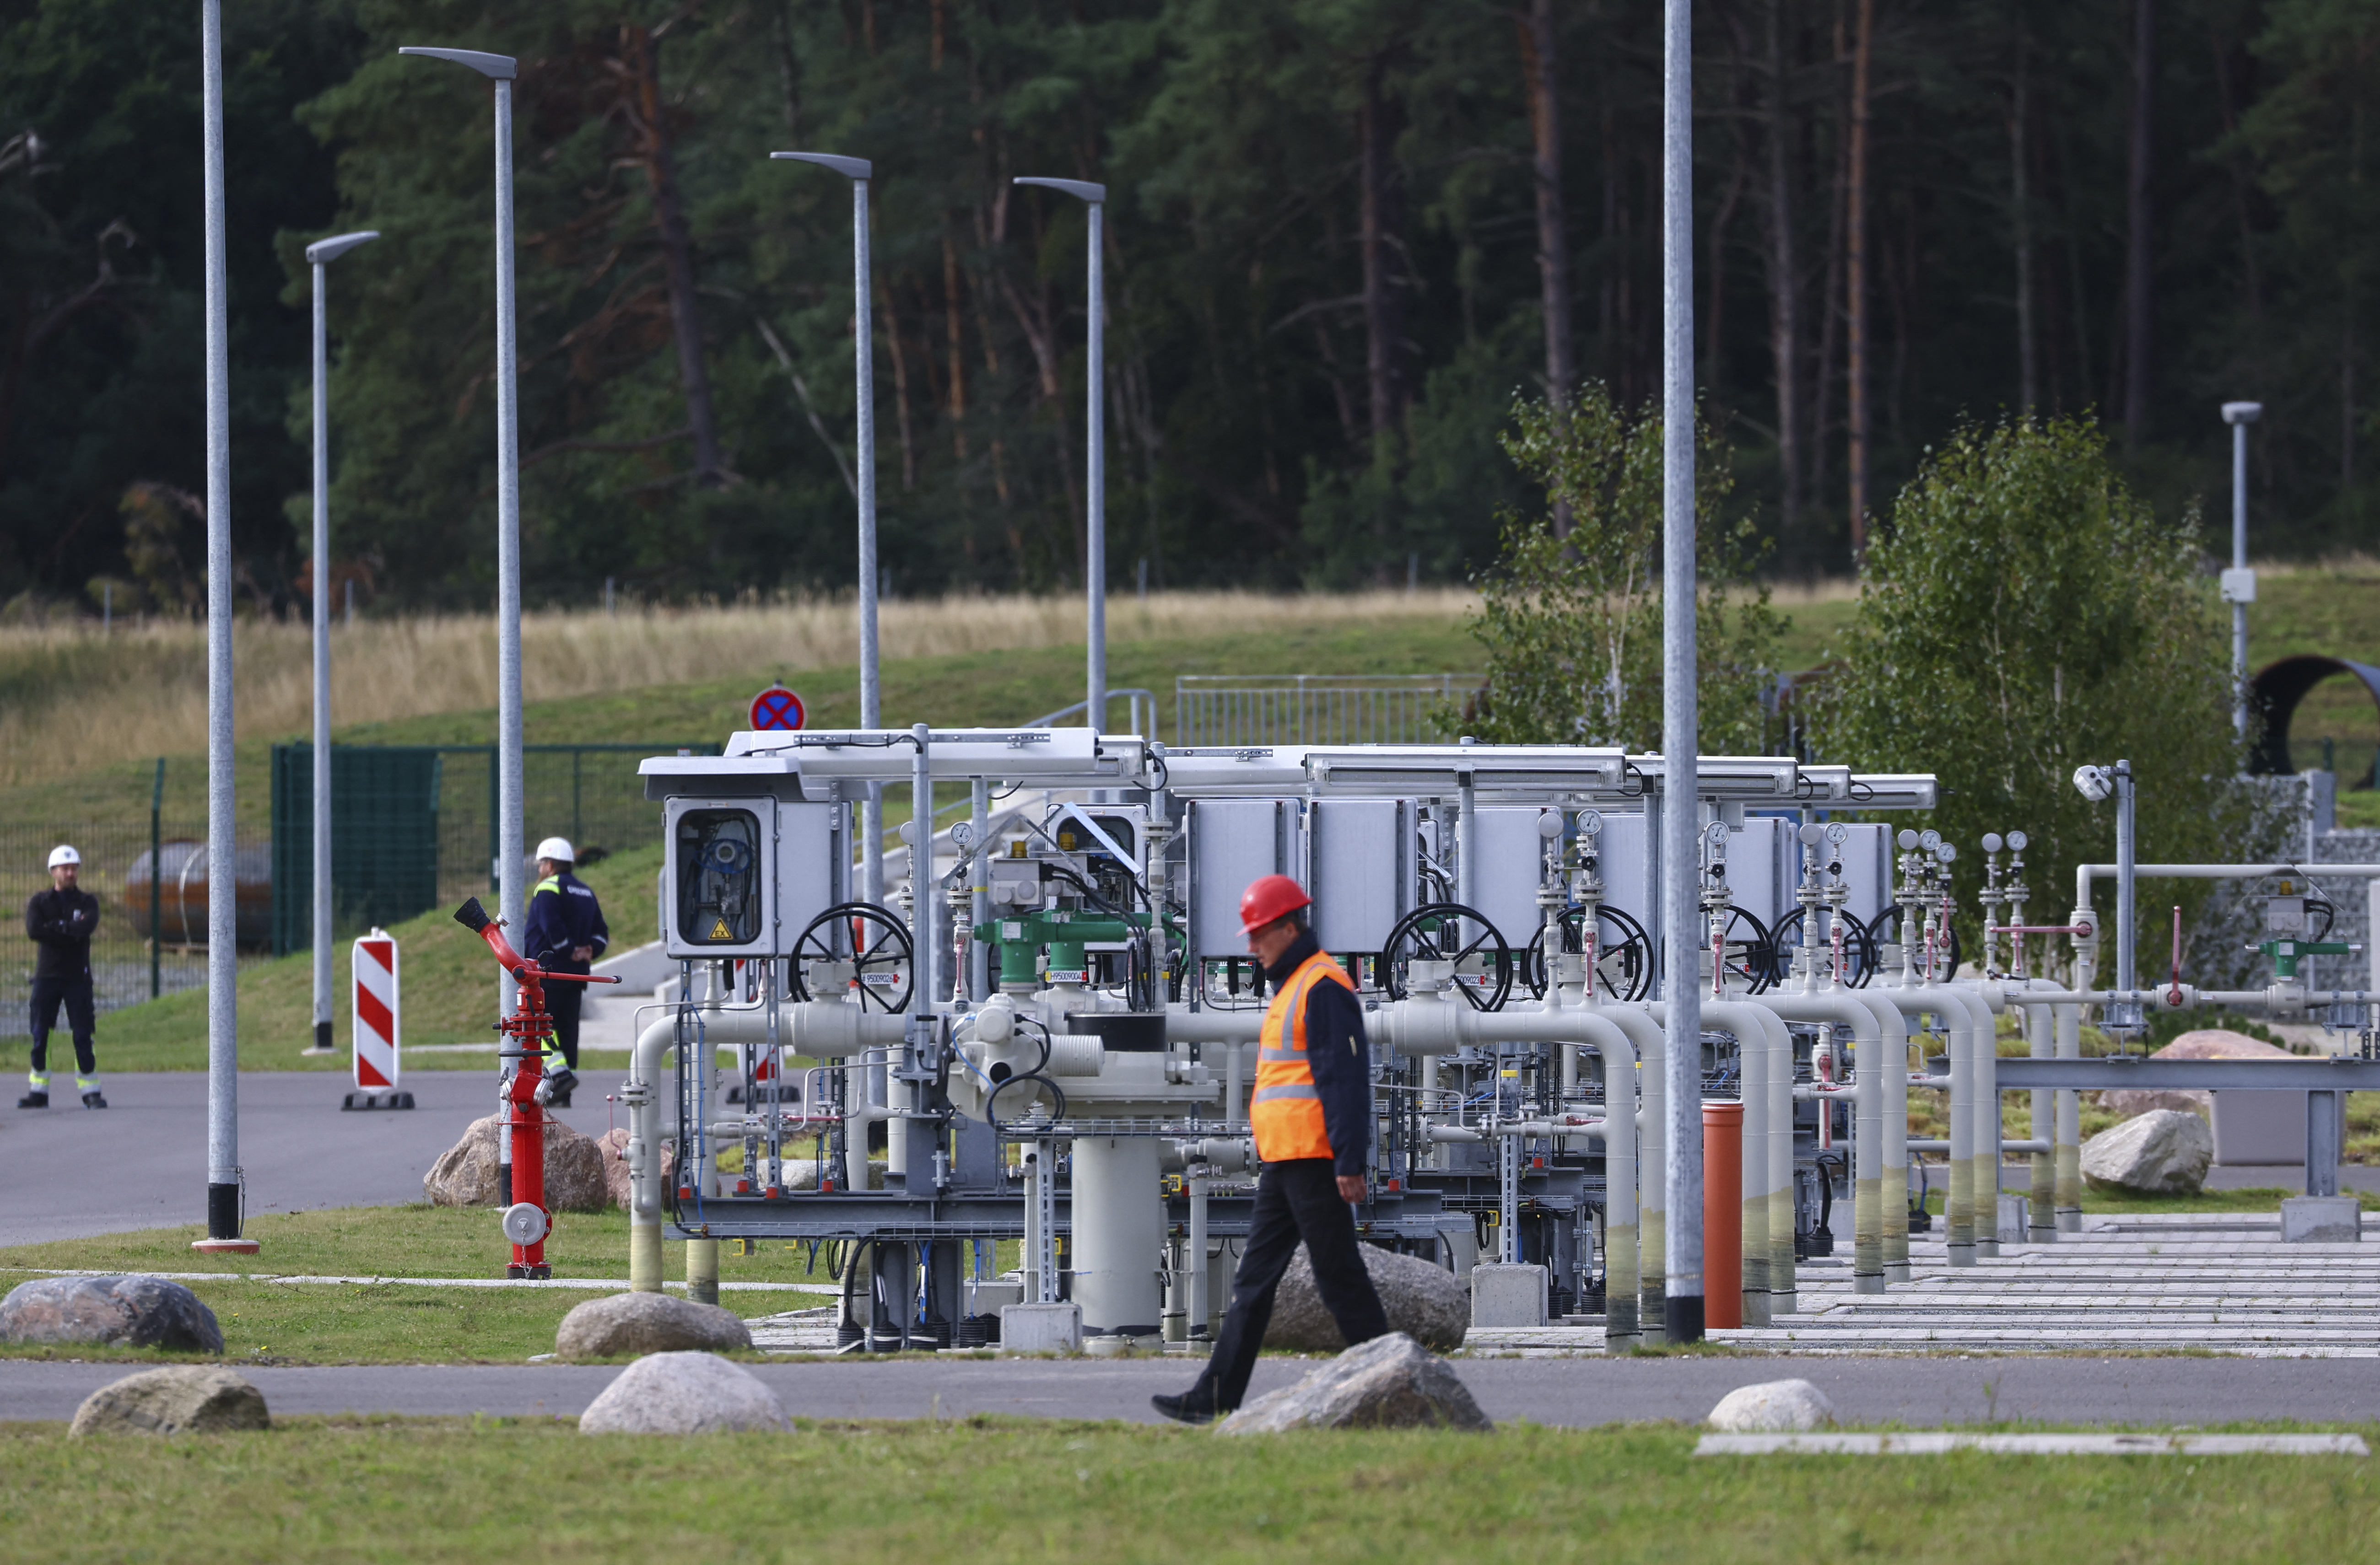 Nord Stream 2 landfall facility in Lubmin